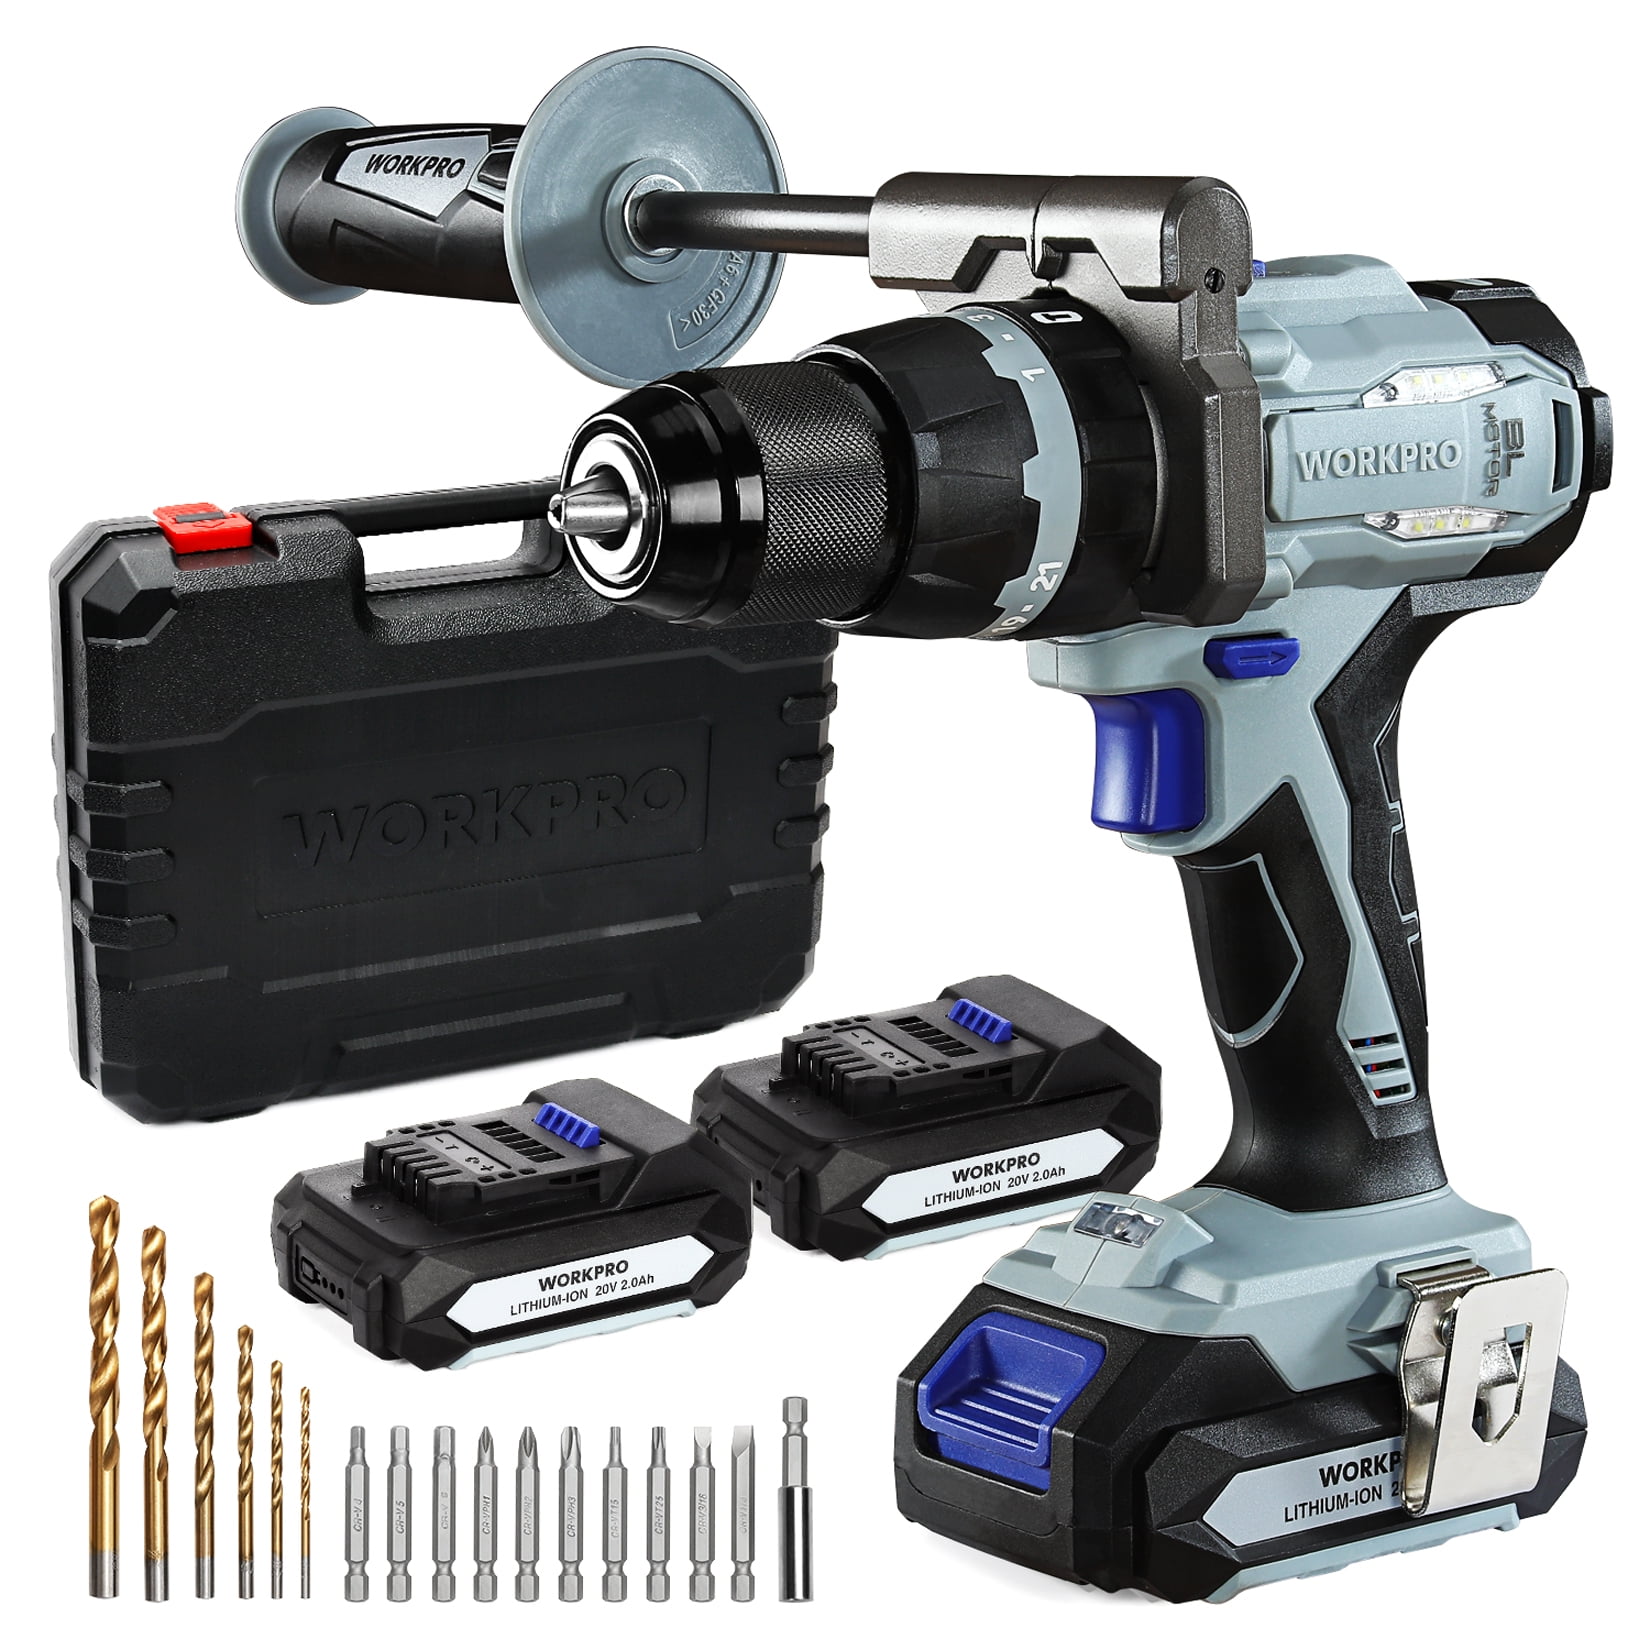 WORKPRO 20V Brushless Cordless Drill, with 2 Batteries(2.0 Ah) and Handle, 487 in-lbs 21+3 Torque Setting, 1/2” Chuck, Pieces Drill Driver Kit with Carrying Case Walmart.com